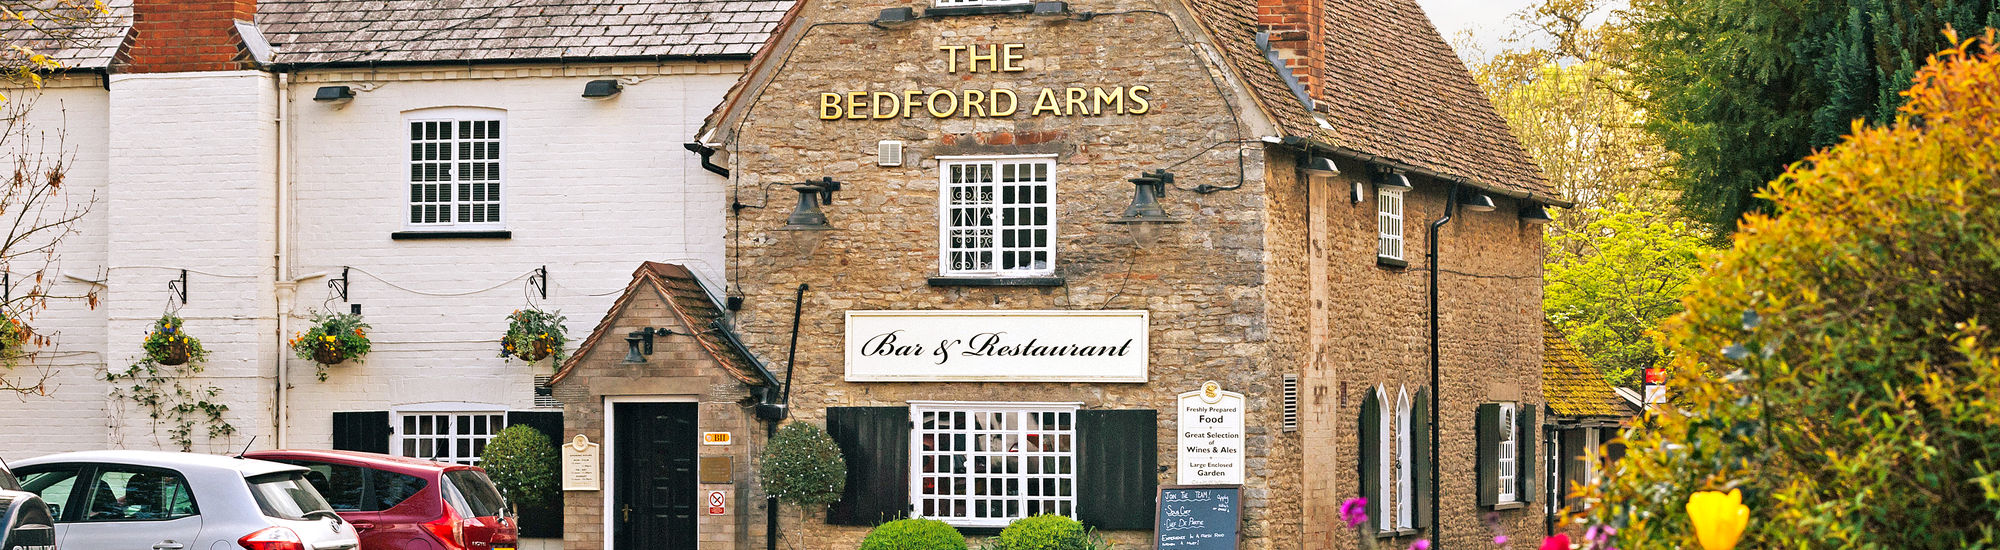 The Bedford Arms, Oakley